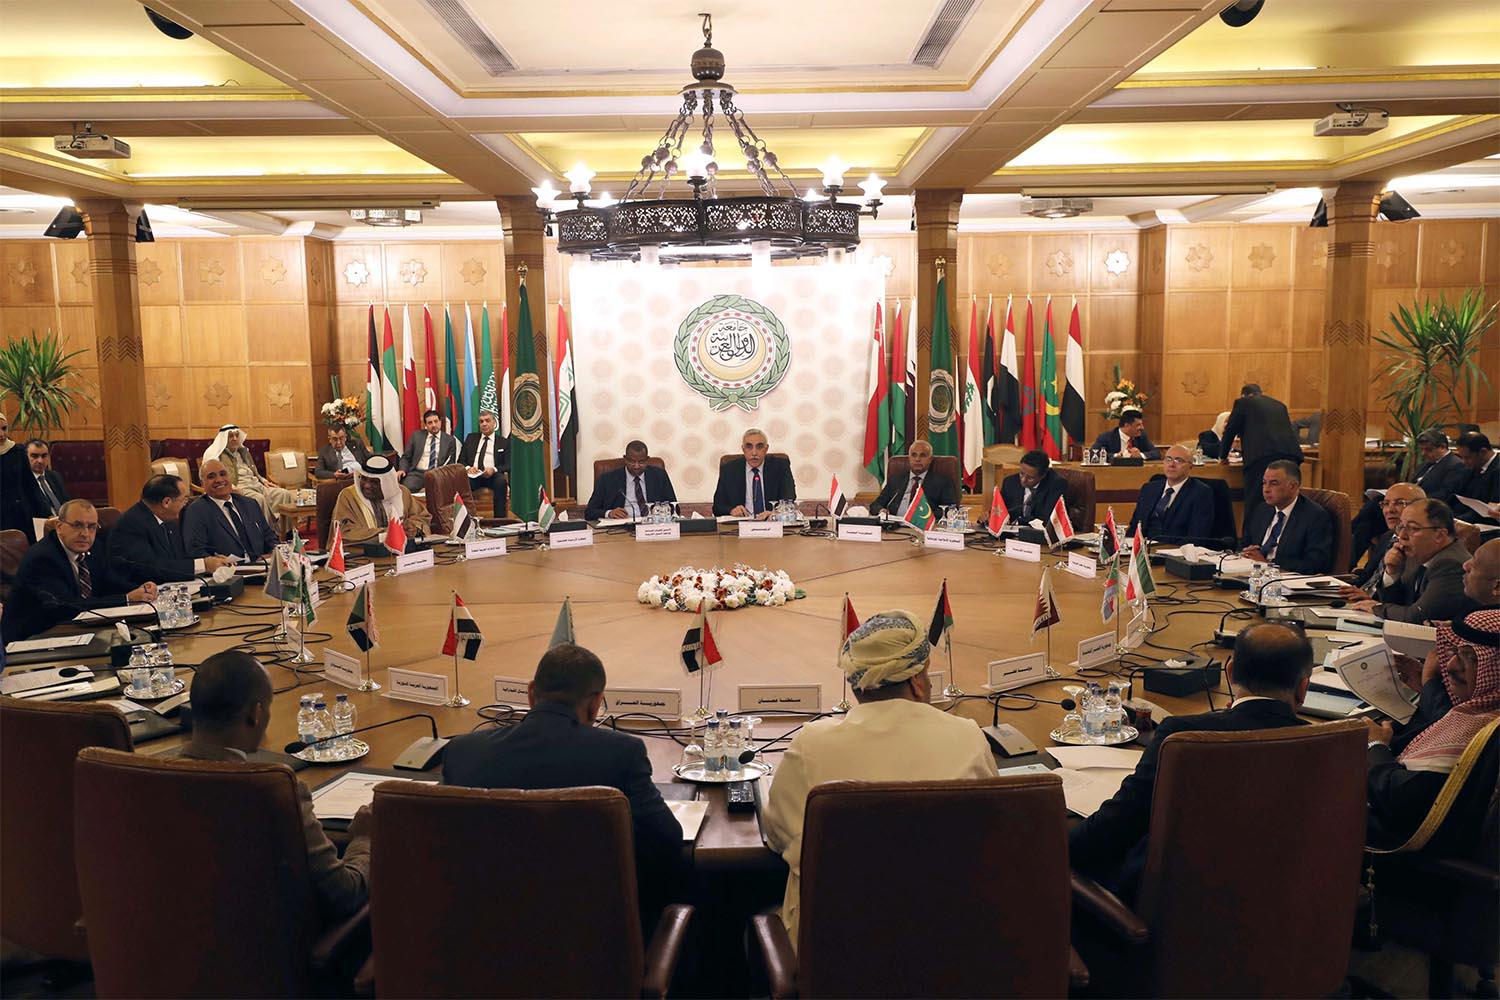 The Arab League reaffirmed its commitment to Libyan unity